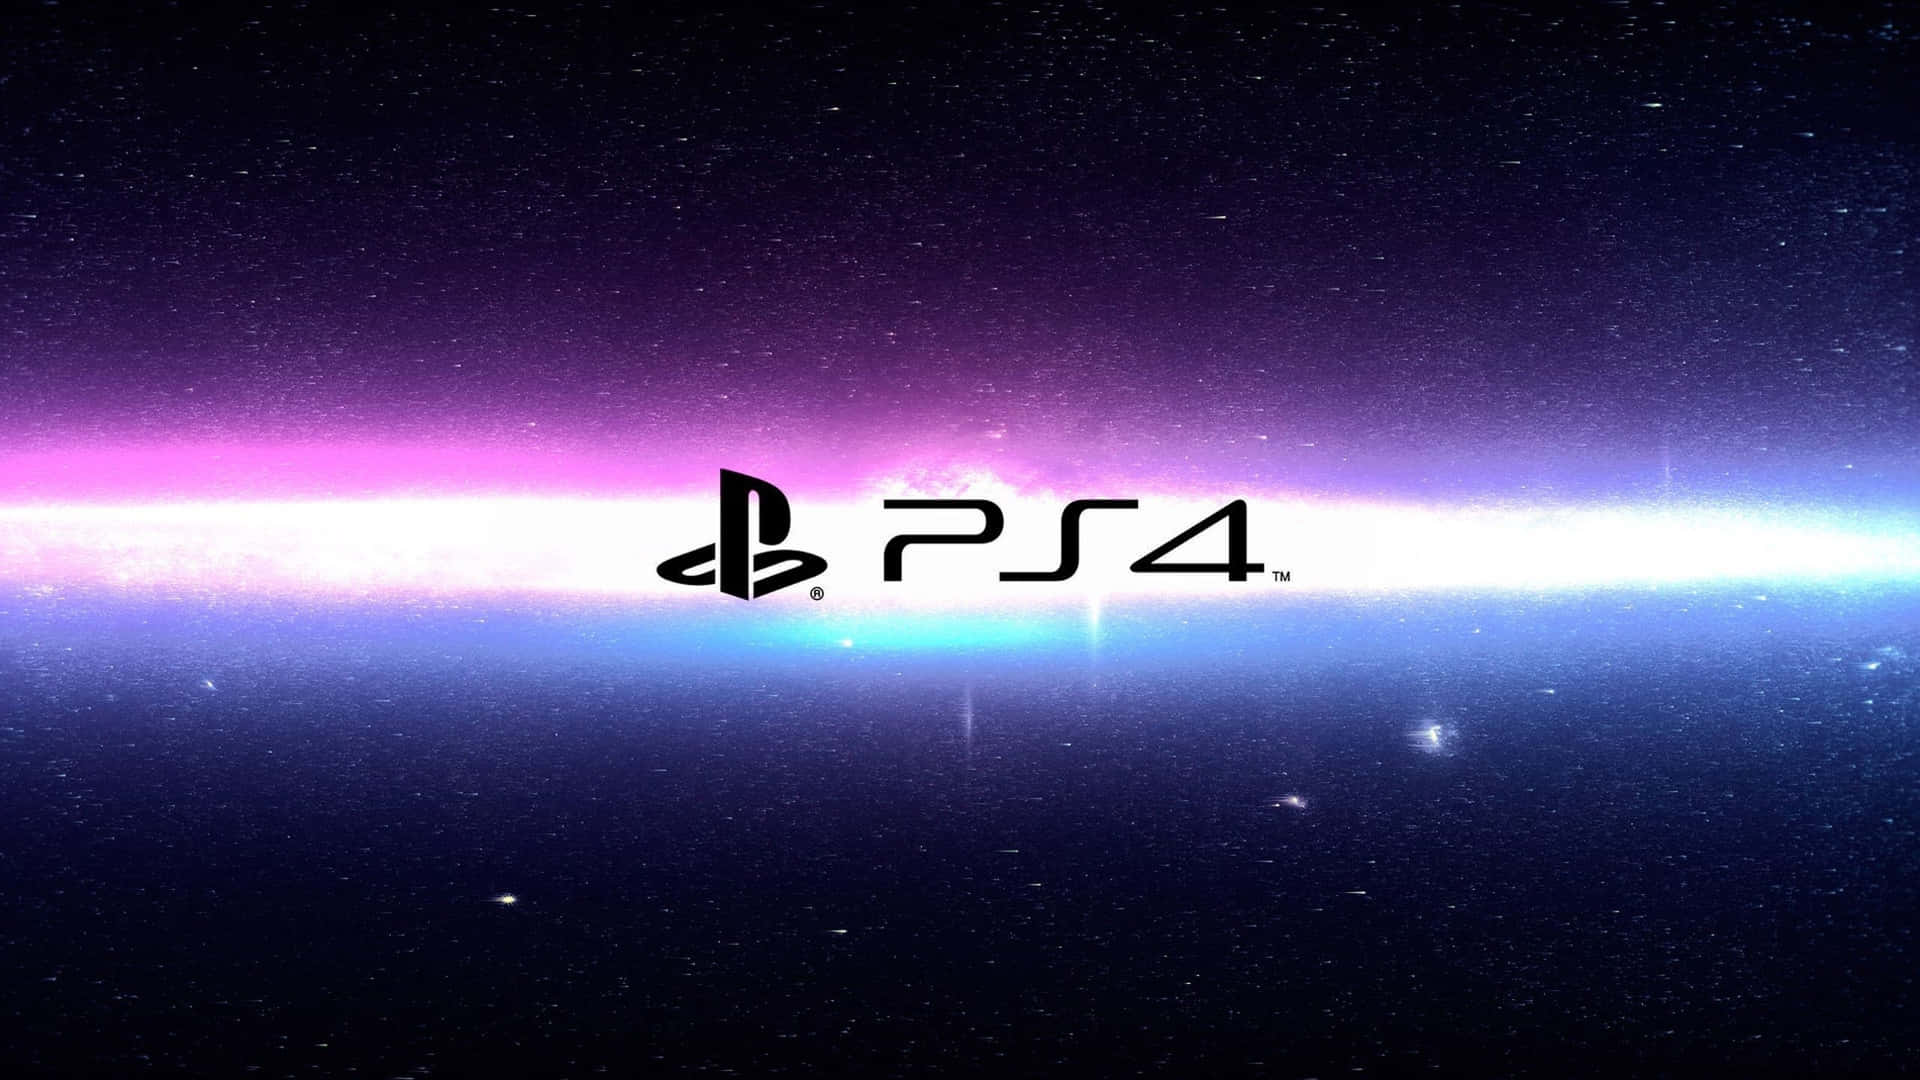 Amazing Cool Ps4 With Neon Bright Galaxy Effect Background